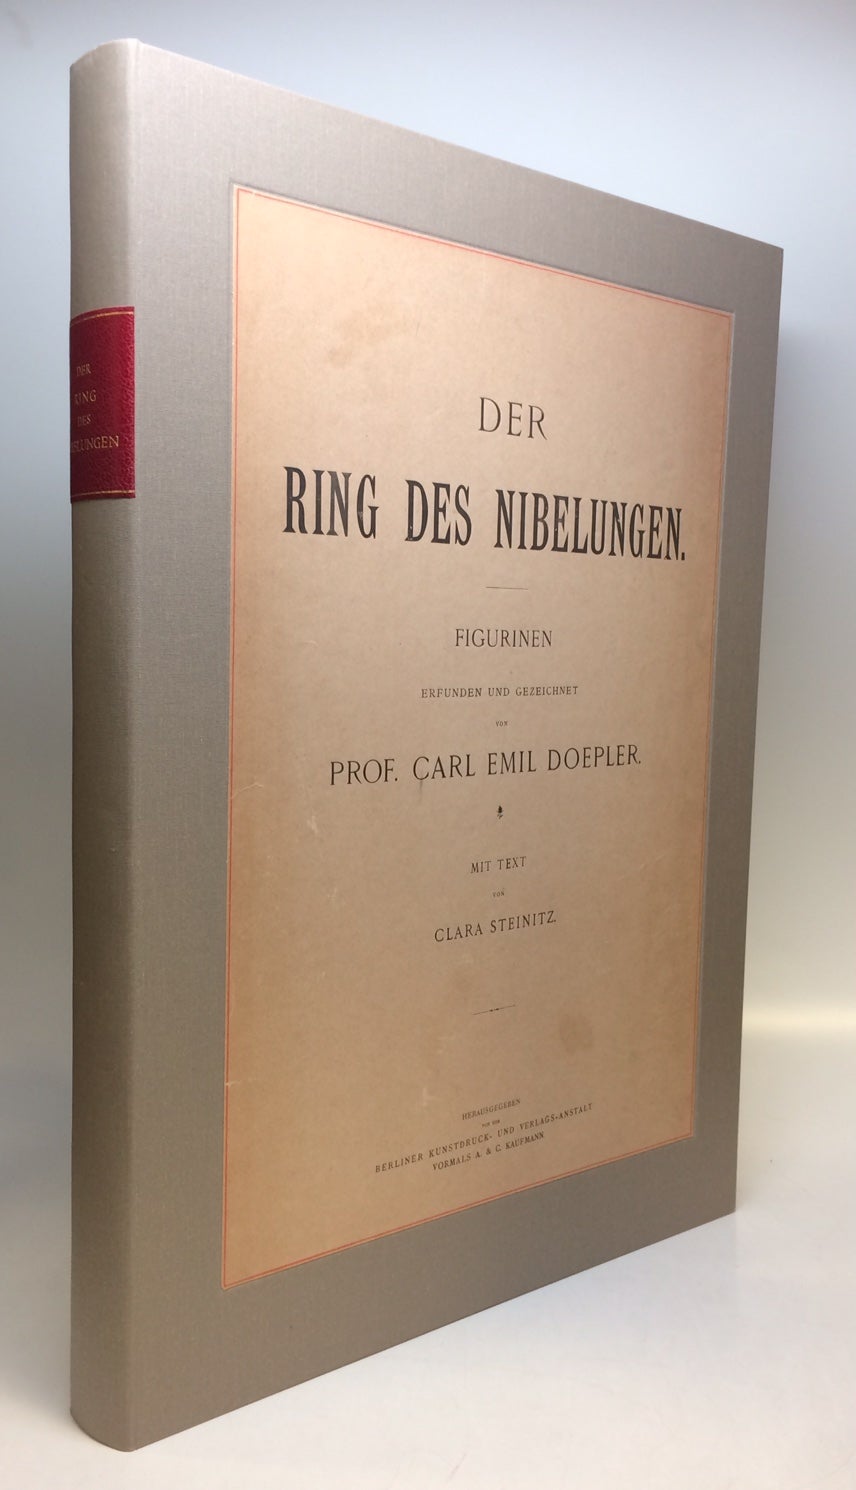 German drama 'The Ring of the Nibelung' written in 1848 to 1874 by Richard  Wagner. The plot revolves around a magic ring that was forged by the  Dwarves that grants the power